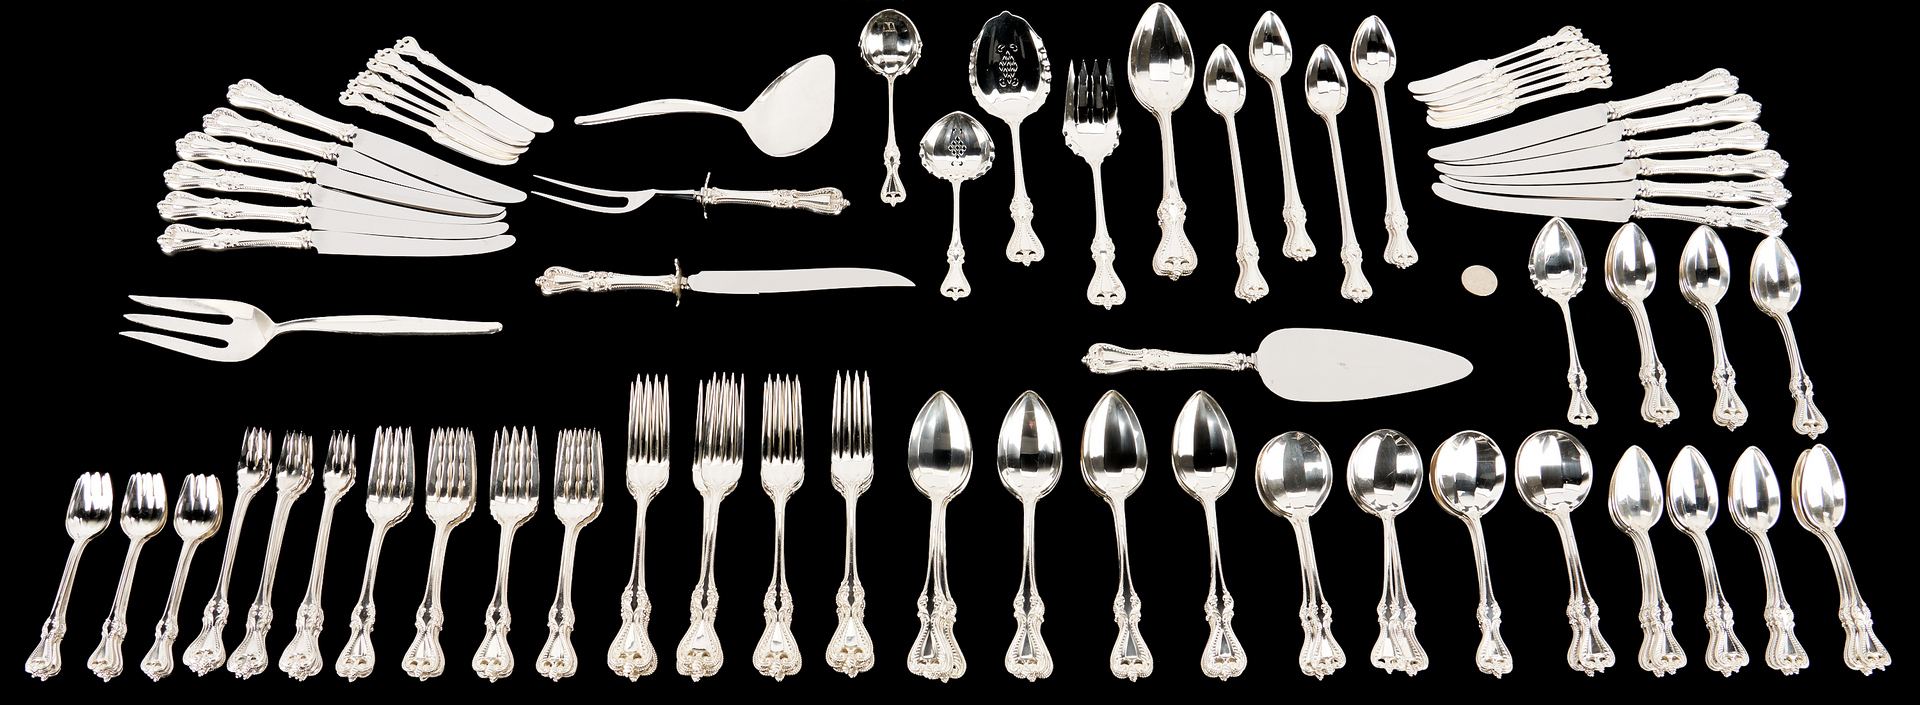 Lot 88: 147 Pcs. Towle Sterling Silver Flatware, incl. Old Colonial